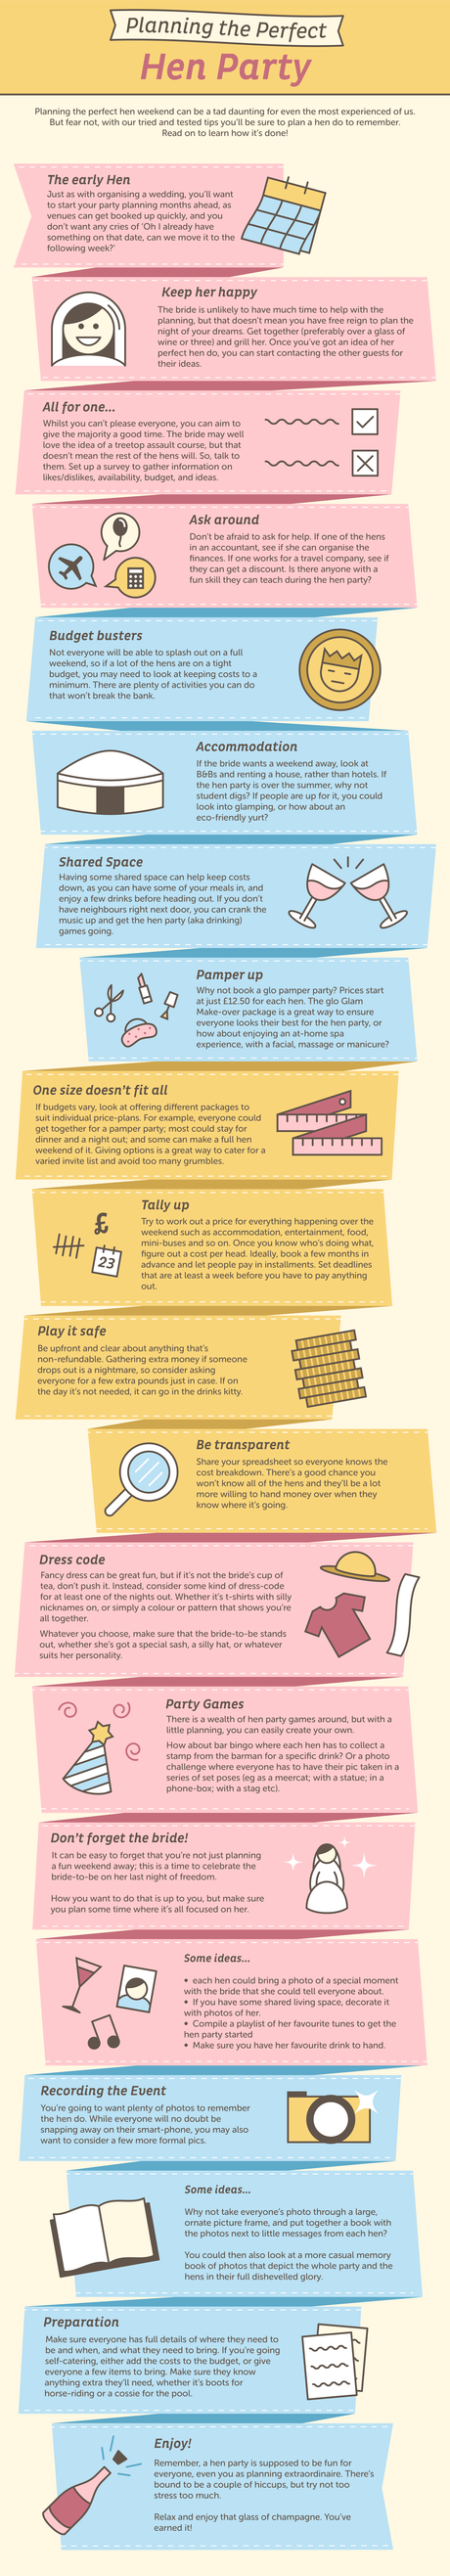 How To Have The Ultimate Hen Party Infographic